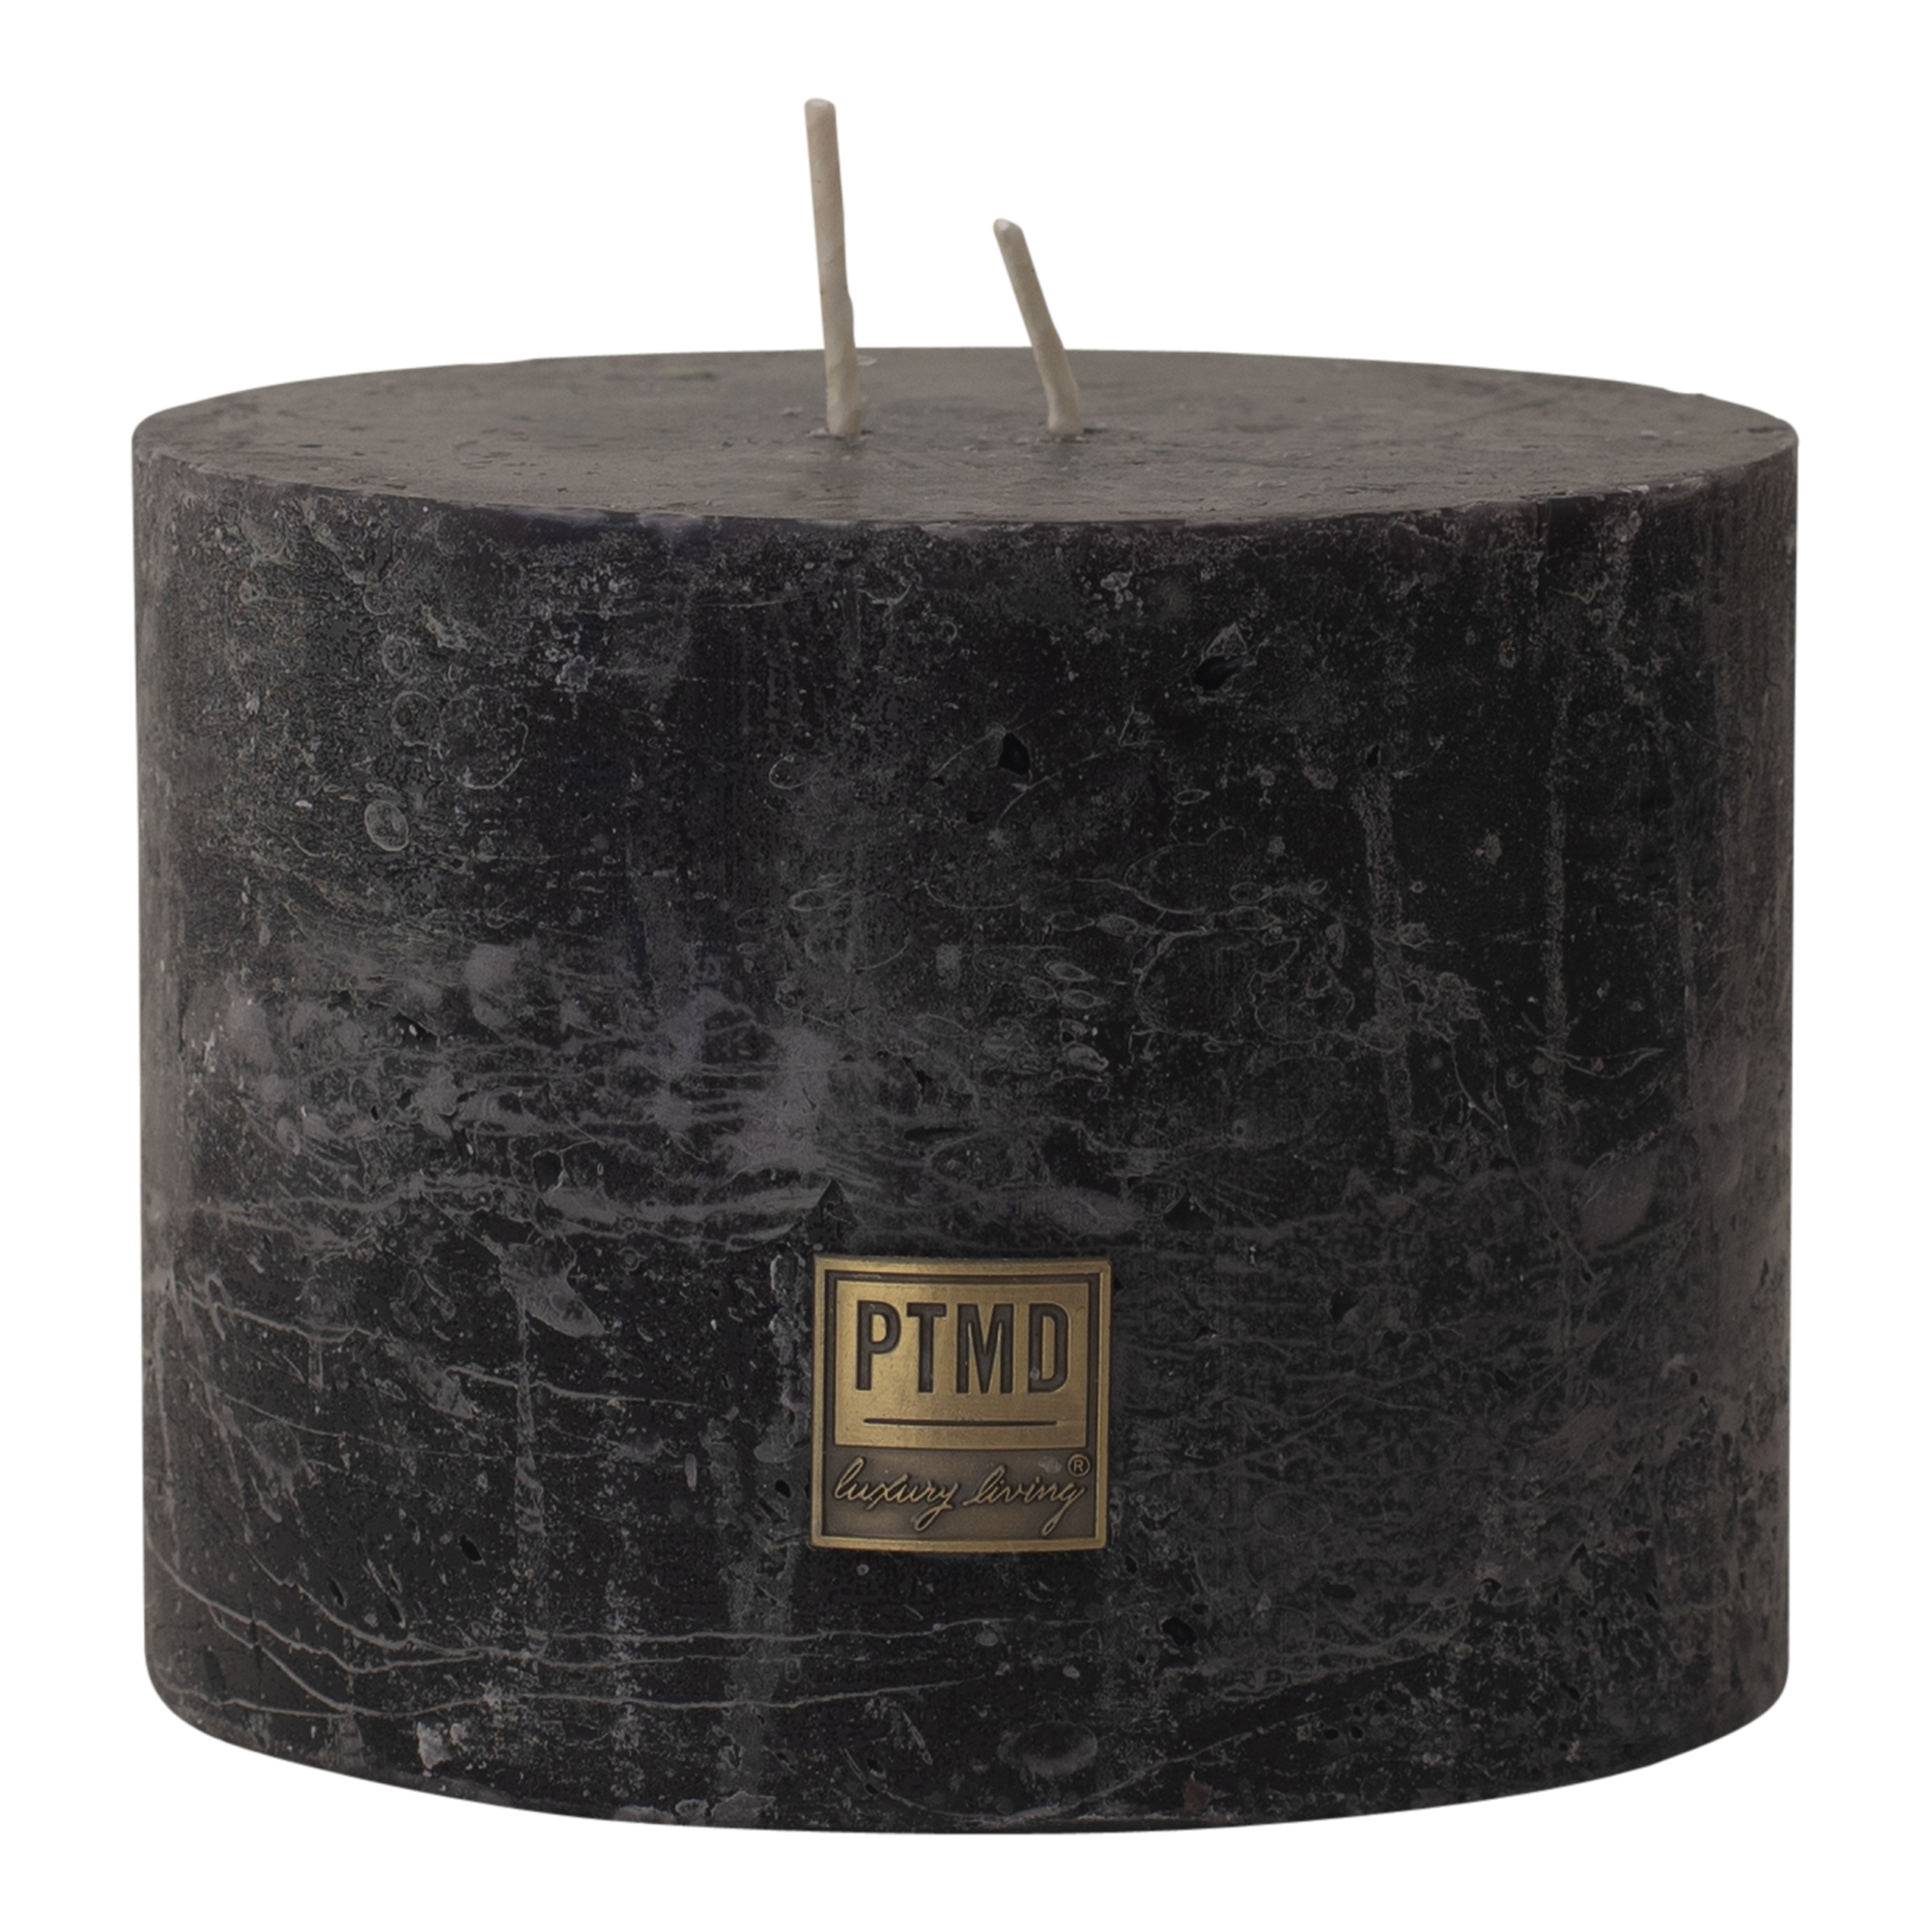 ptmd-9-x-12cm-charcoal-black-wax-rustic-block-candle